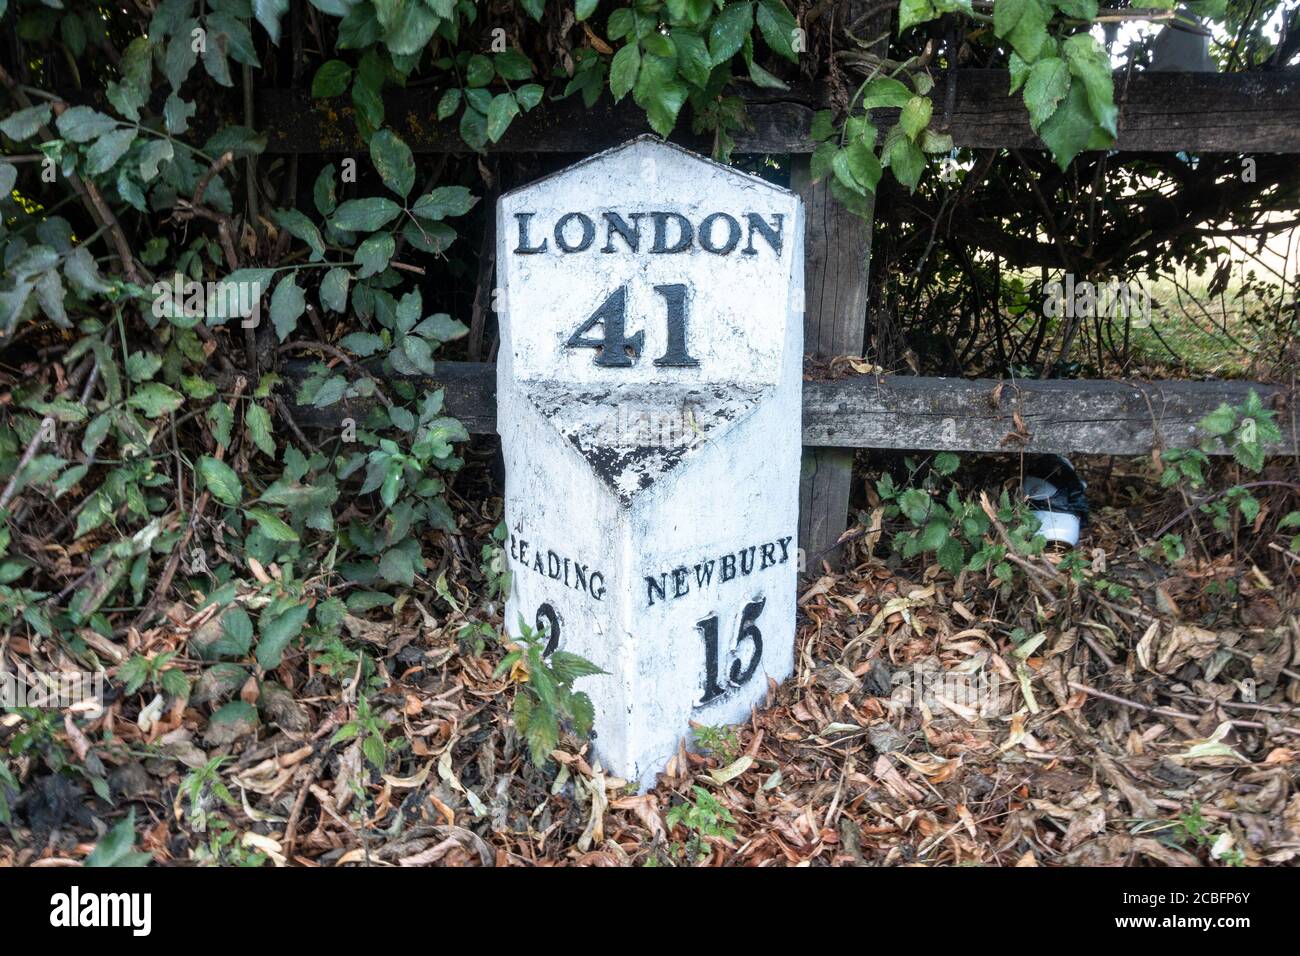 A milepost on the side of The Bath Road in Reading, Berkshire gives distances to London, Newbury and the centre of Reading. Stock Photo